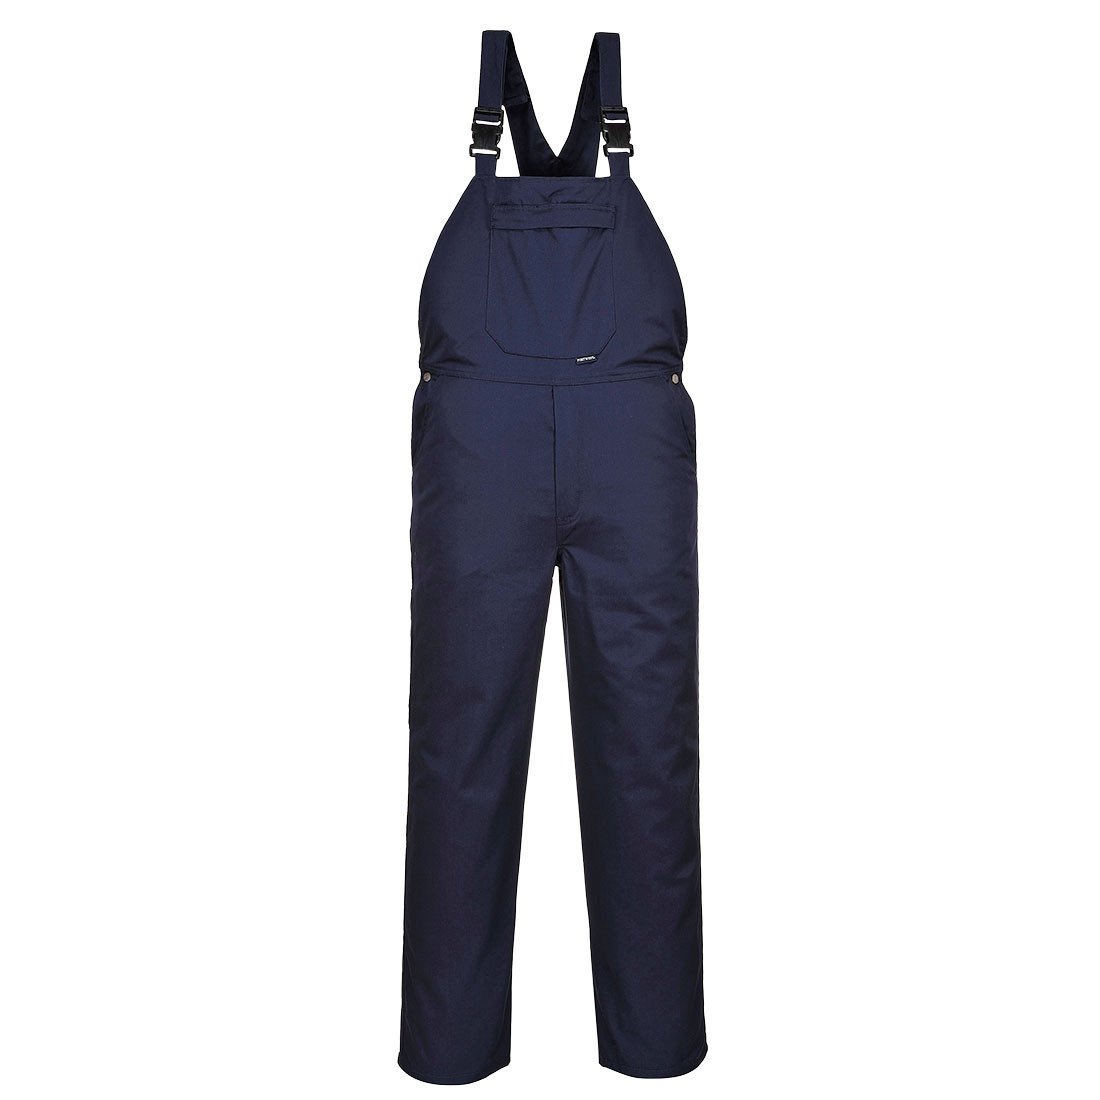 Portwest C875 Burnley Bib and Brace Overalls for Decorators in Navy